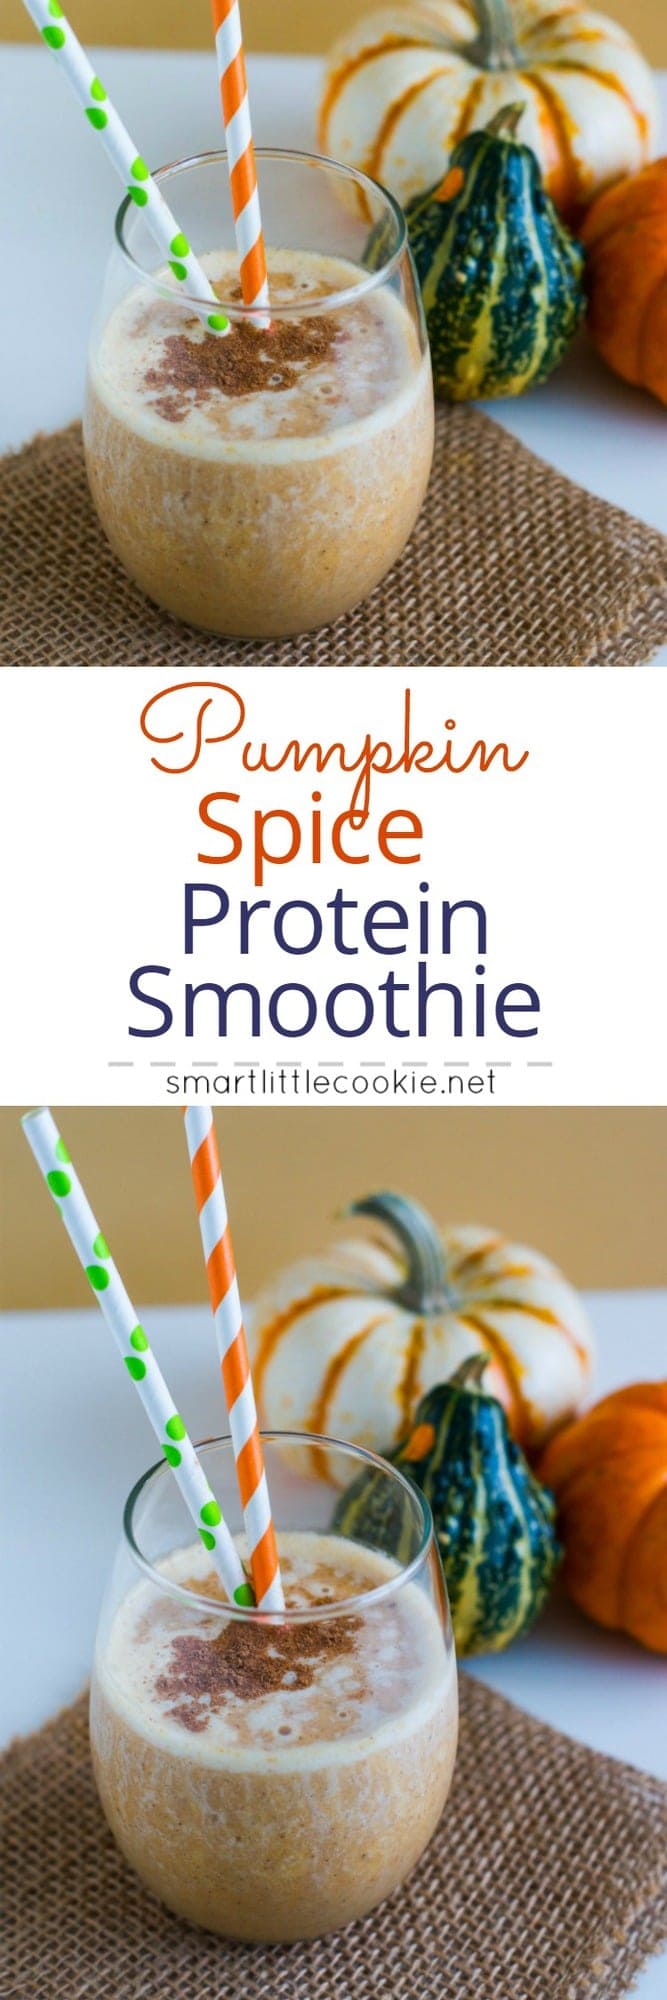 Pinterest graphic. Pumpkin spice protein smoothie with text overlay.